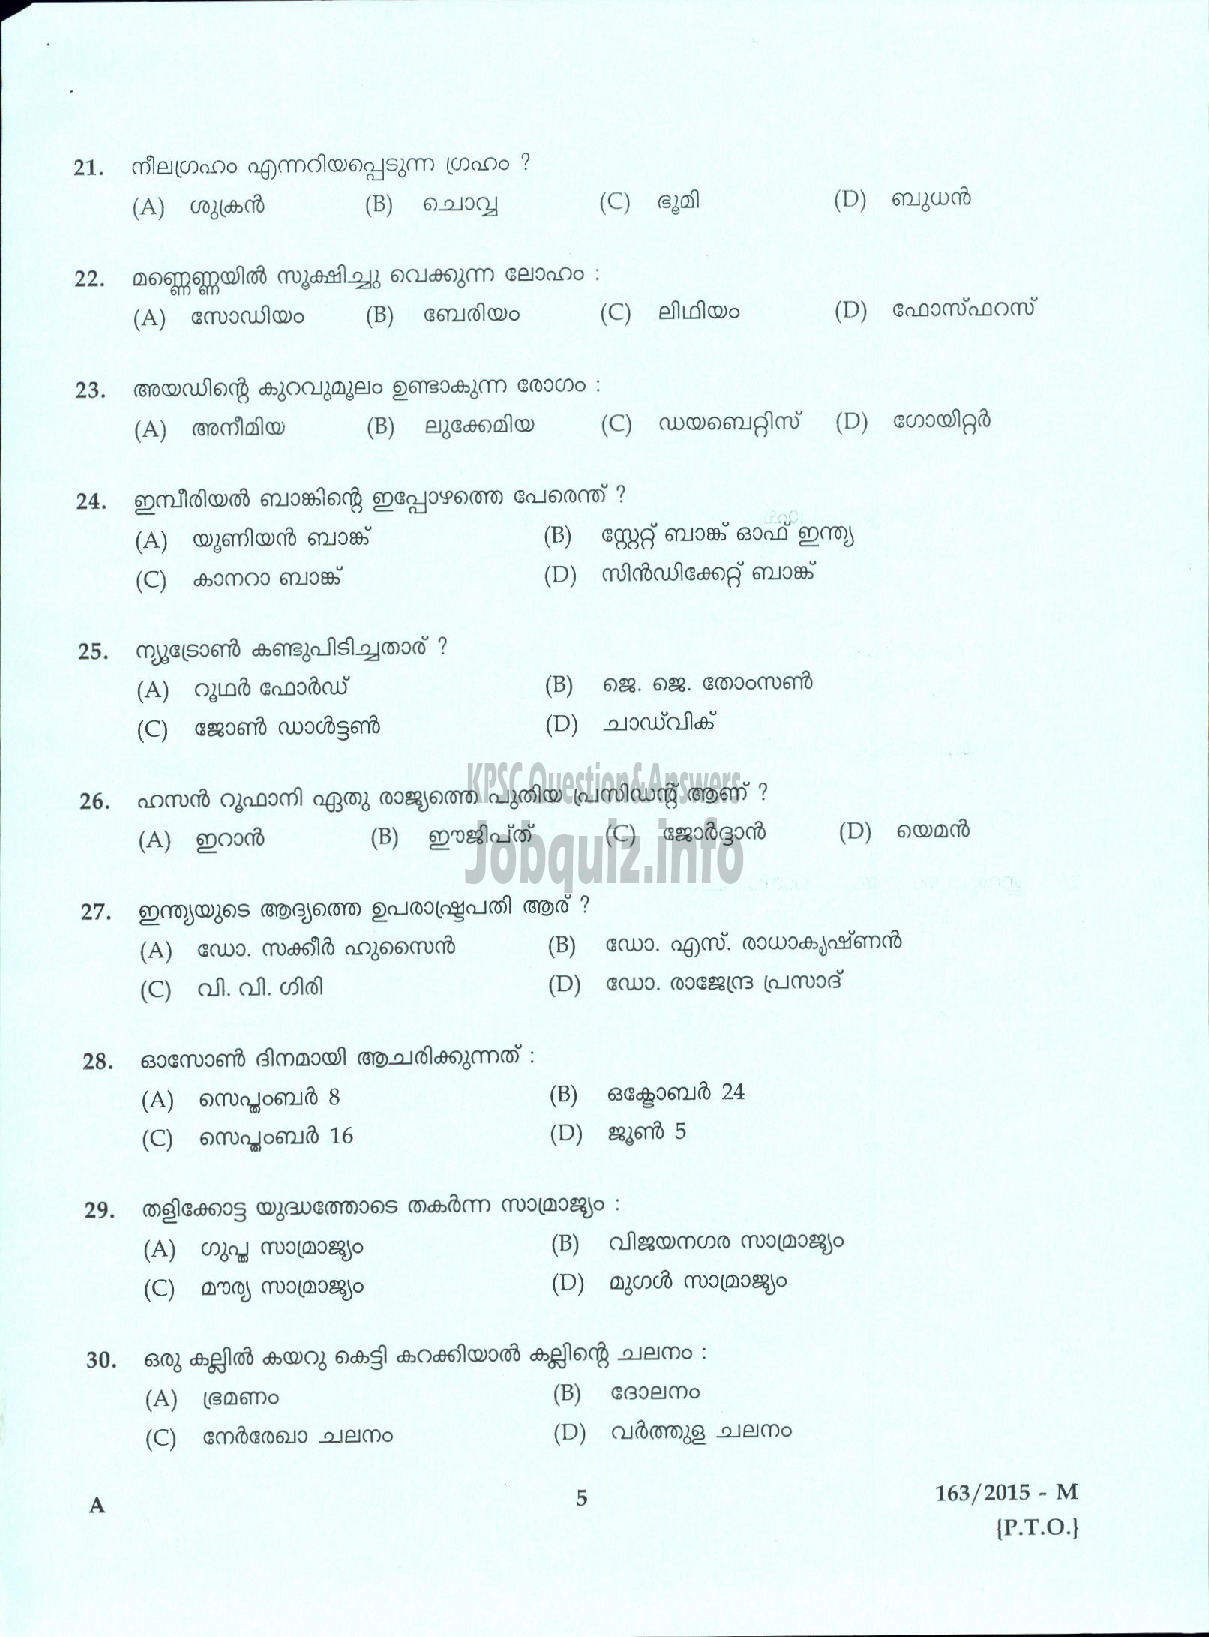 Kerala PSC Question Paper - DRIVER CUM VEHICLE CLEANER GRADE III TRACO CABLE COMPANY LIMITED ( Malayalam ) -3